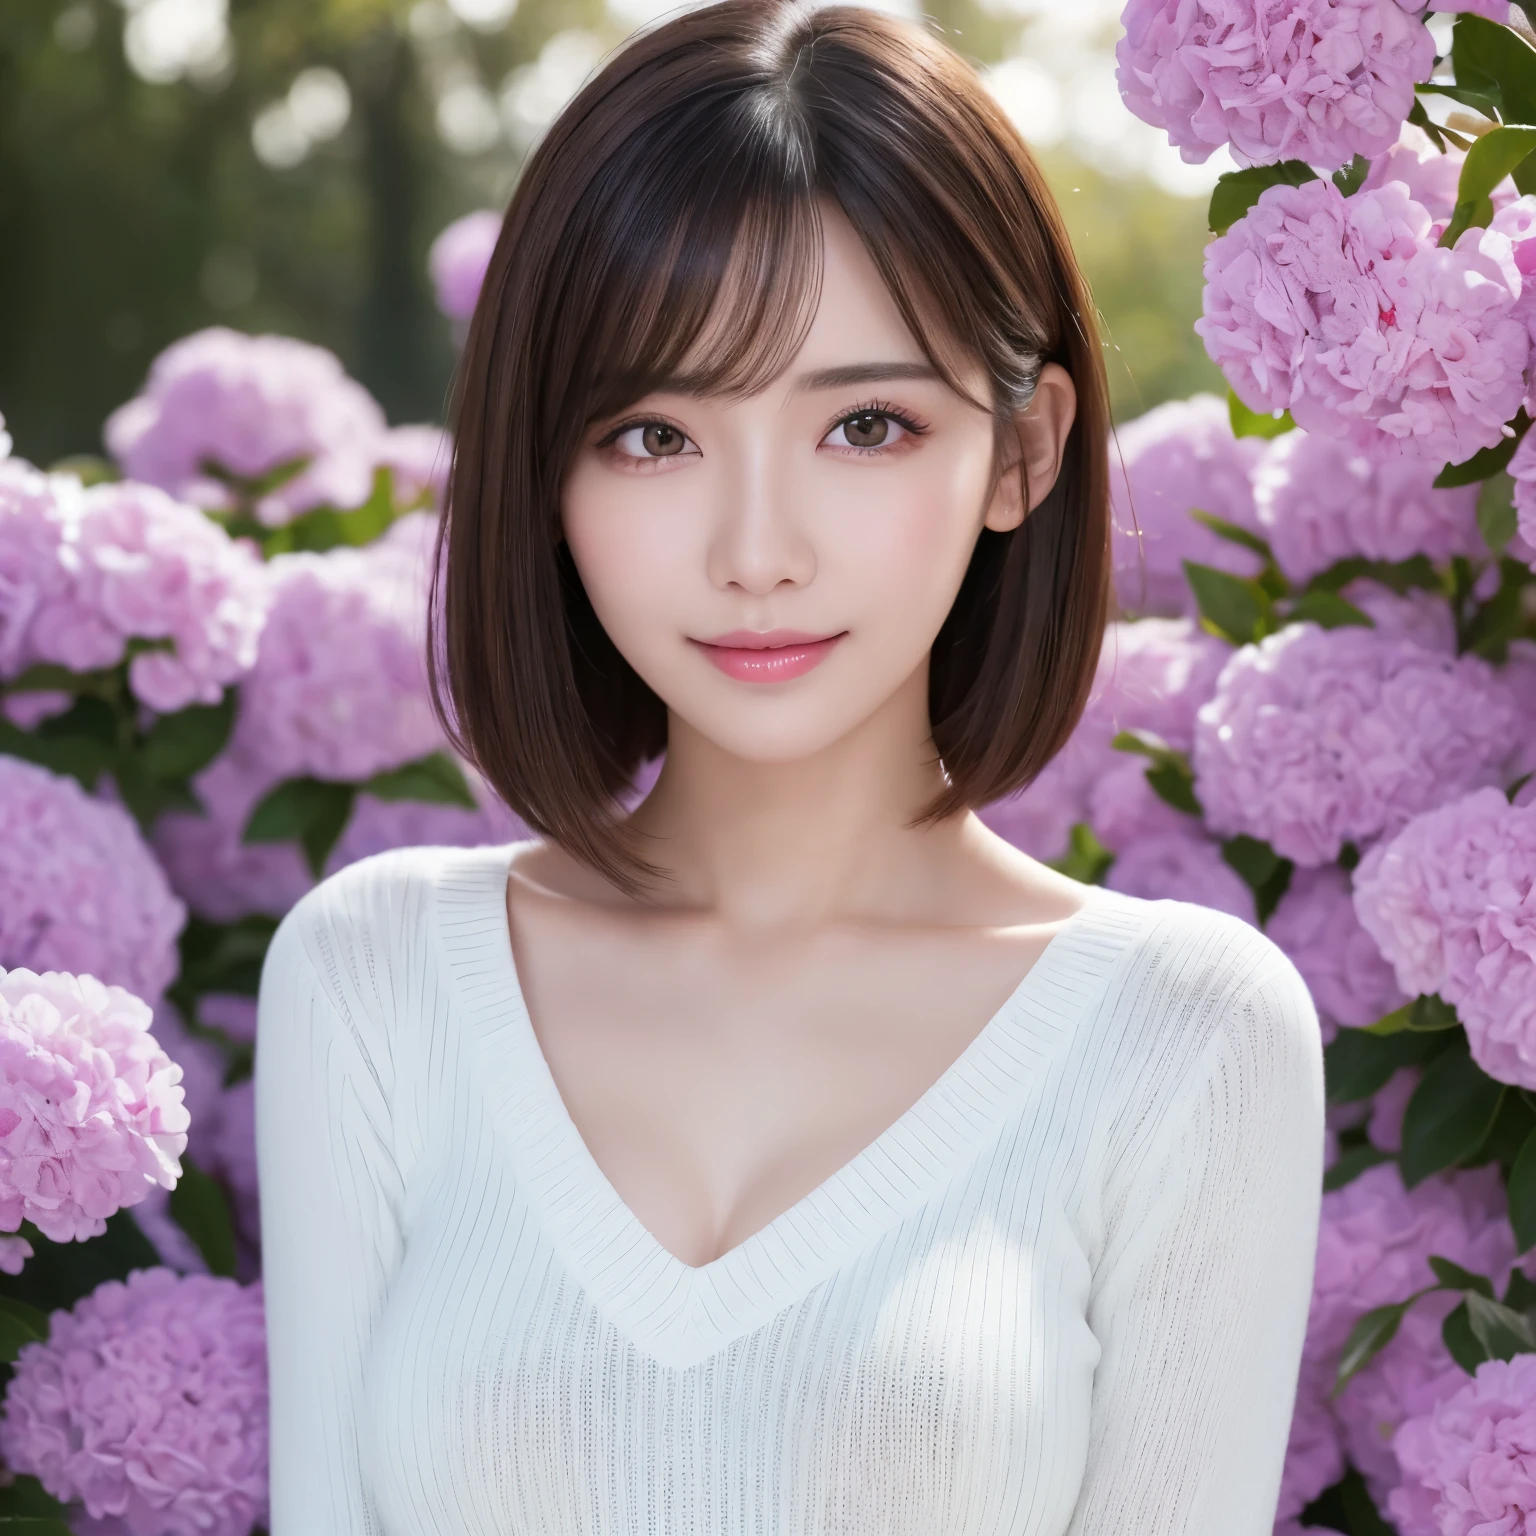 (highest quality、table top、8k、best image quality、Award-winning work)、one beautiful woman、25 years old、(Fixed front configuration:1.1)、(Front photo from the chest up:1.1)、big and full breasts、[clavicle]、(V-neck tight knit sweater that fits perfectly to the body:1.1)、look at me and smile、(straight short hair:1.1)、(strongly blurred natural park background:1.1)、Strongly blurred background、droopy eyes、natural makeup、Ultra high definition beauty face、(Super high-definition glowing beautiful skin:1.1)、Lustrous and beautiful skin、Shiny and fine skin、ultra high definition hair、Super high-definition sparkling eyes、Super high resolution glossy lips、accurate anatomy、(very bright and vivid:1.3)